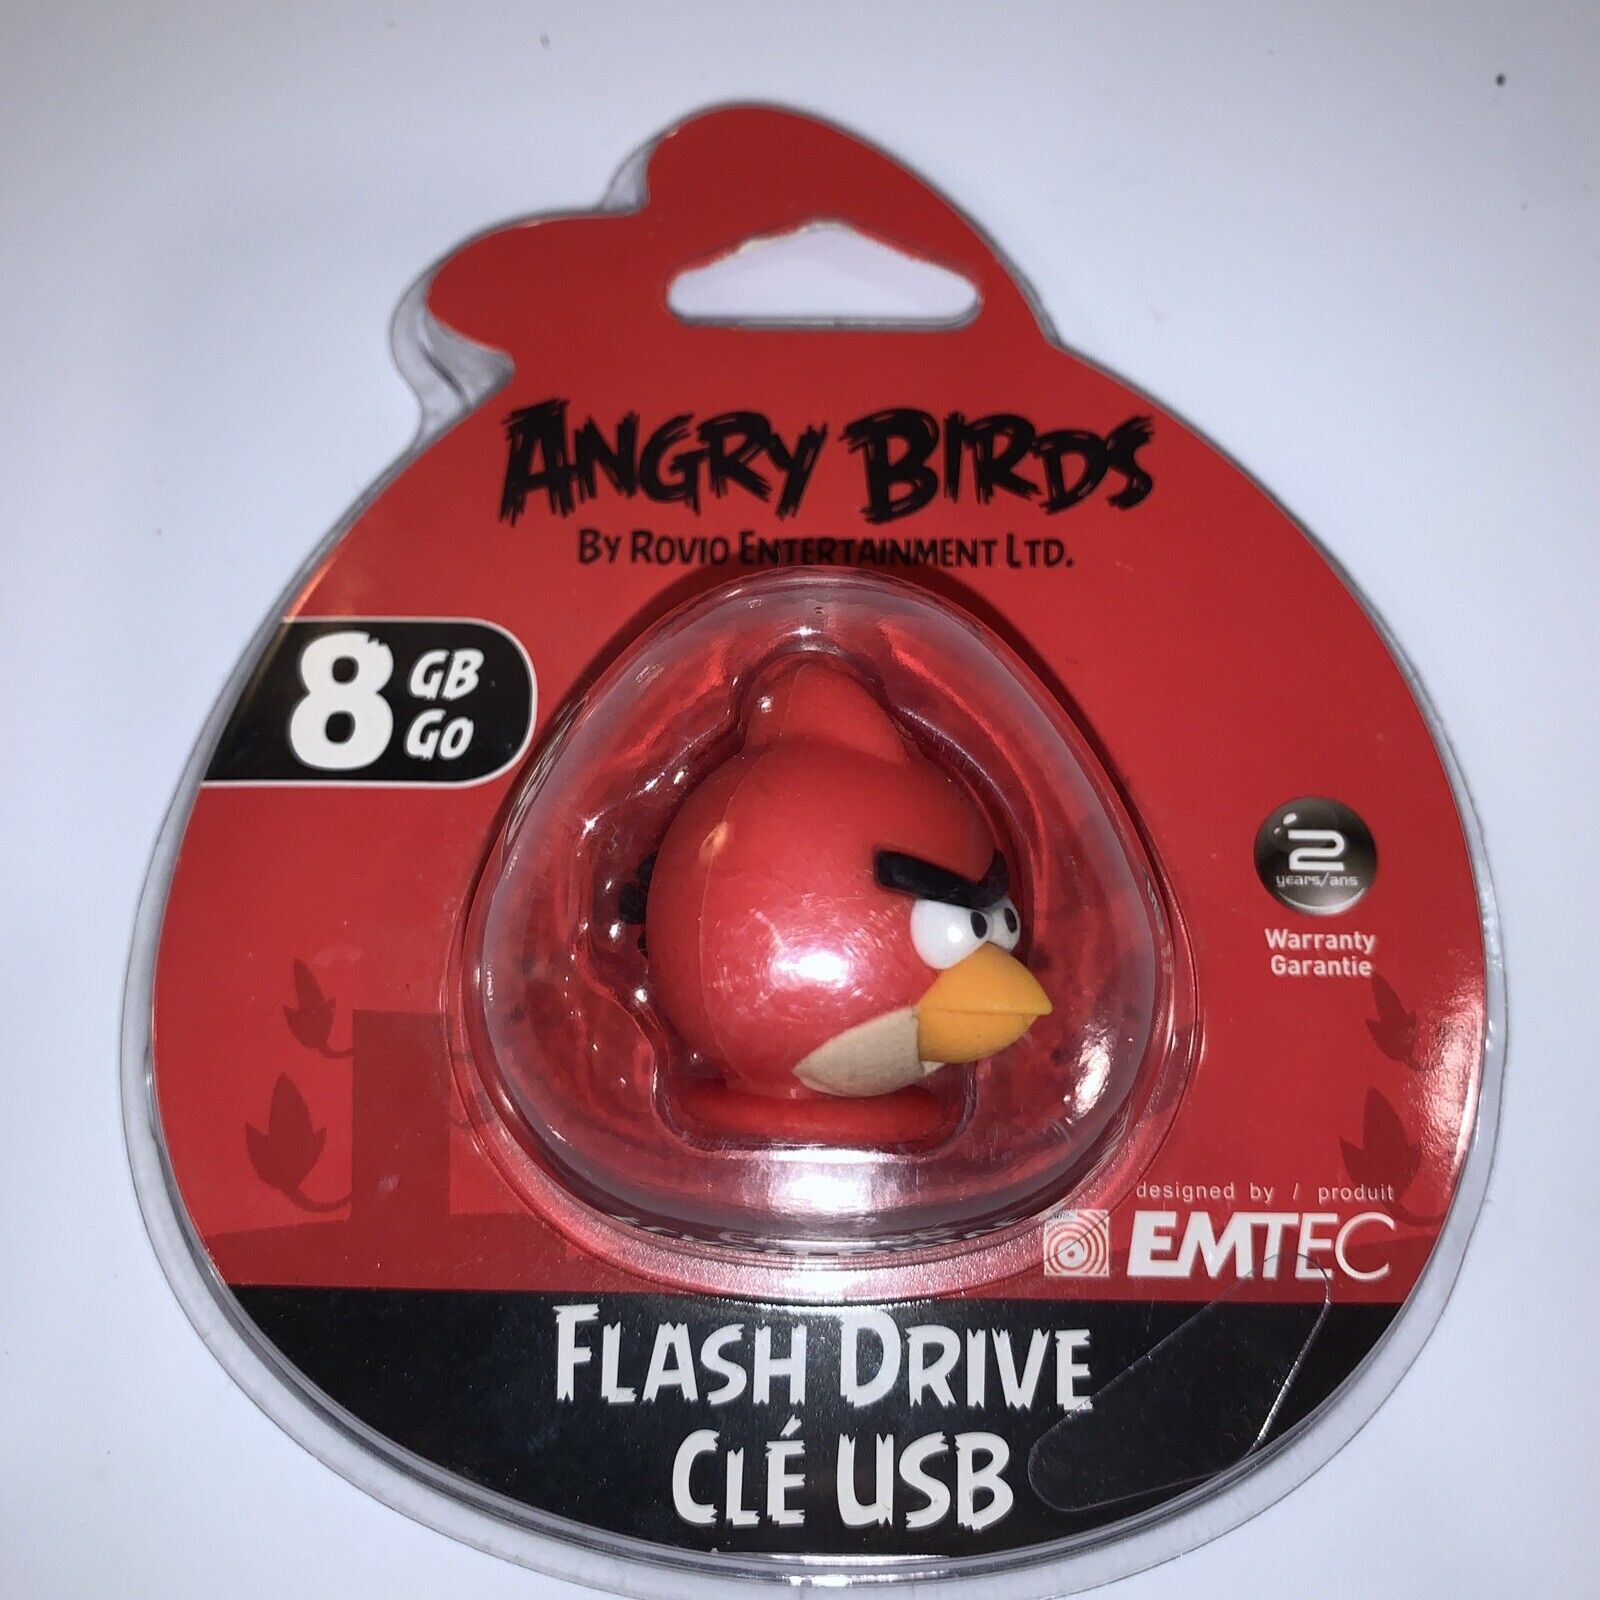 BRAND NEW Emtec USB Flash Drive Angry Birds Red Bird With Strap 8GB SEALED